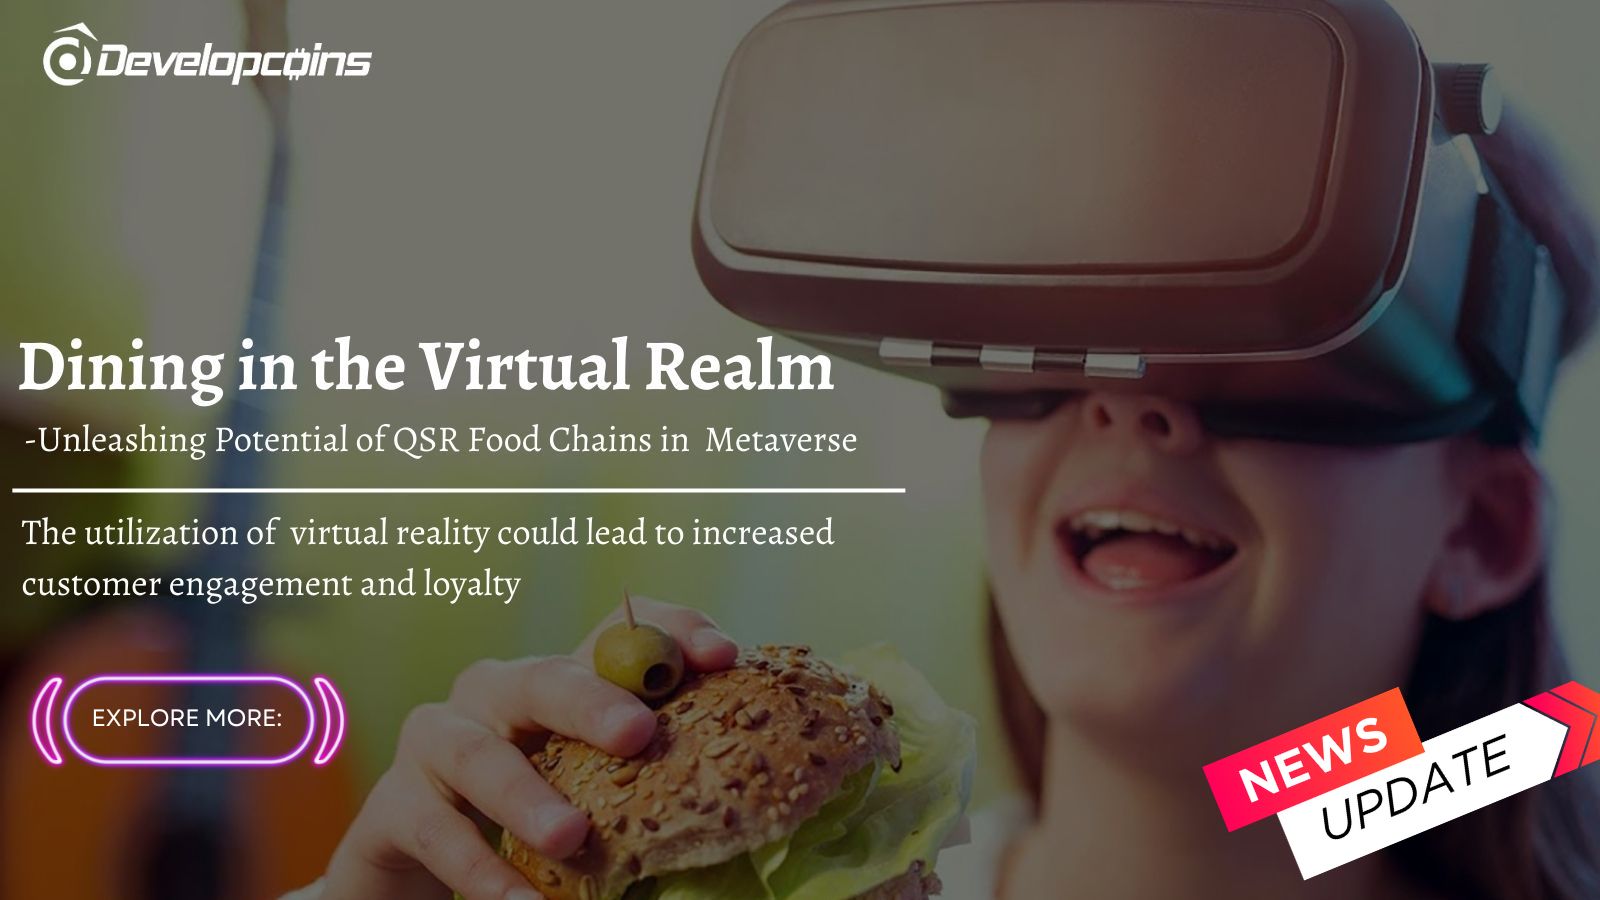 Revolutionizing Dining In The Virtual Realm - Unleashing Potential Of QSR Food Chains In Metaverse